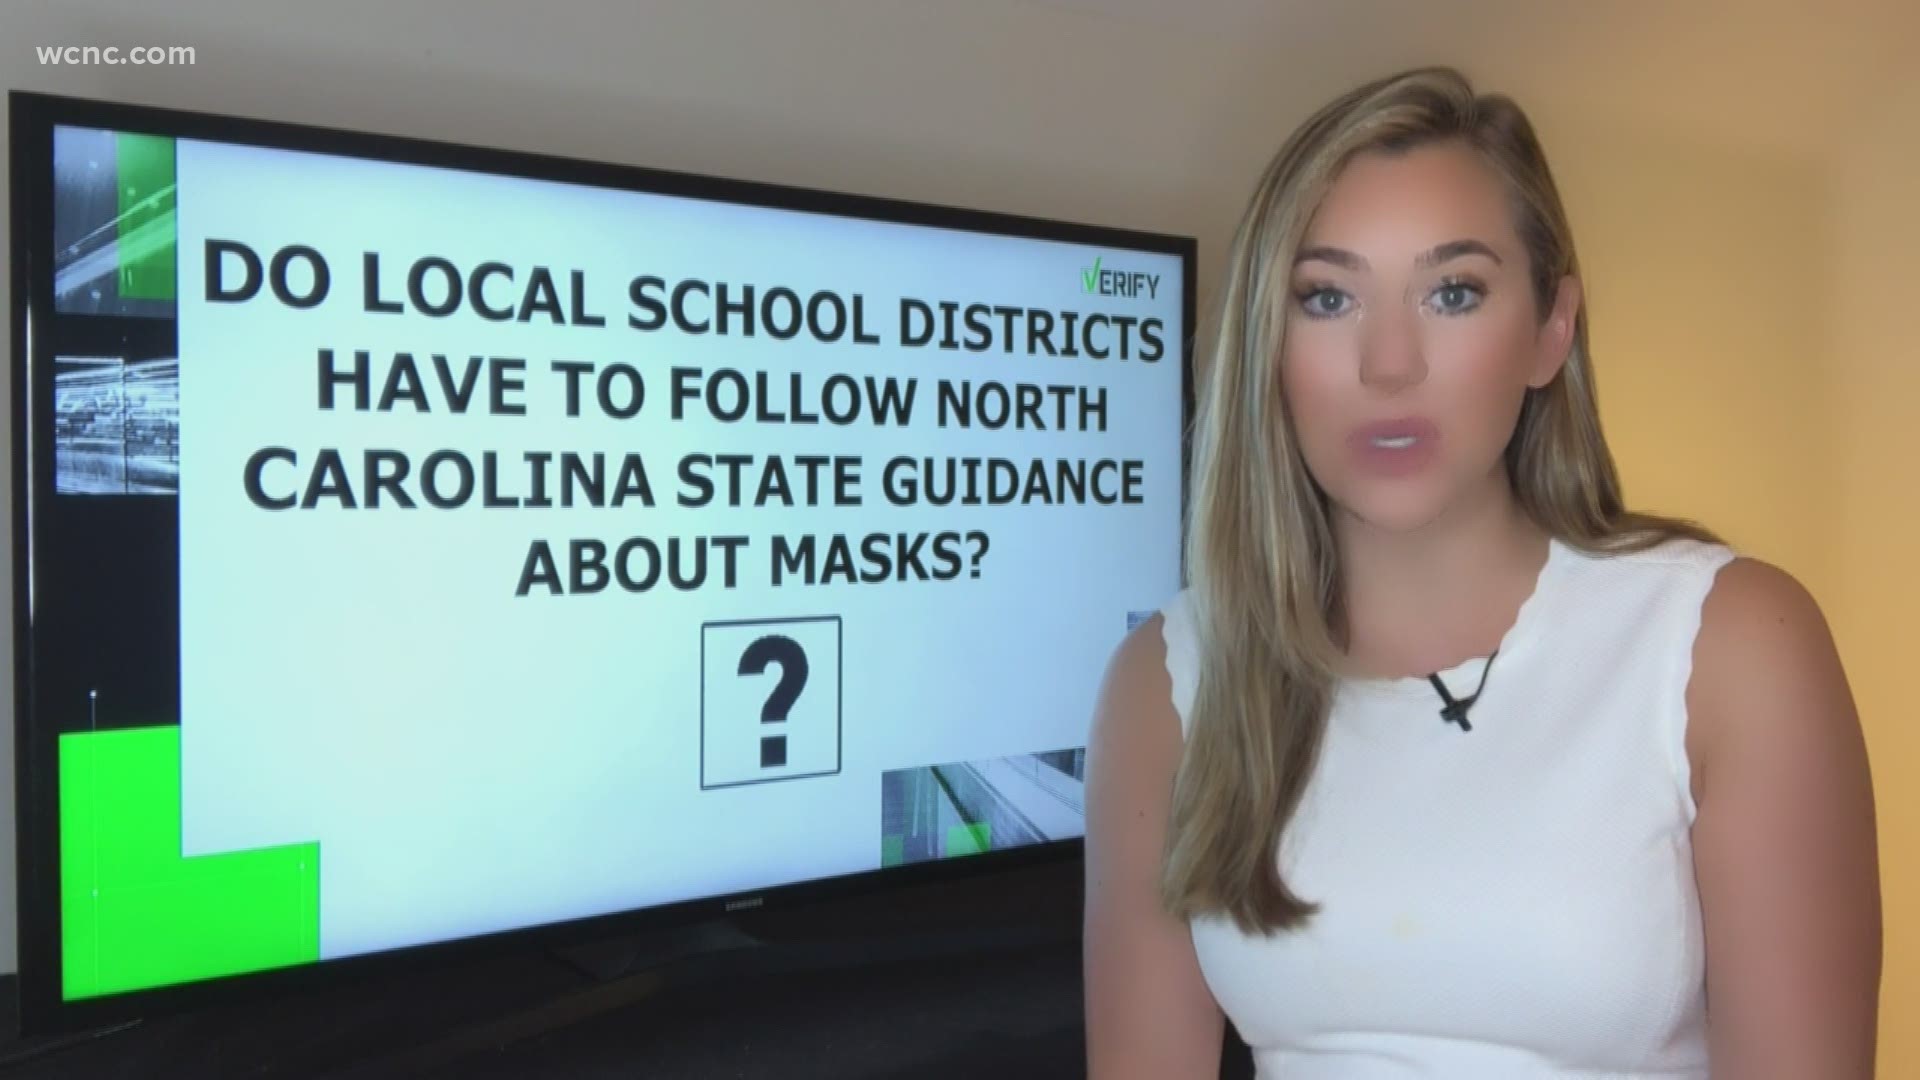 The requirement of face masks has been a hot topic for a while as some counties and cities loosen their restrictions. Do schools have that option?